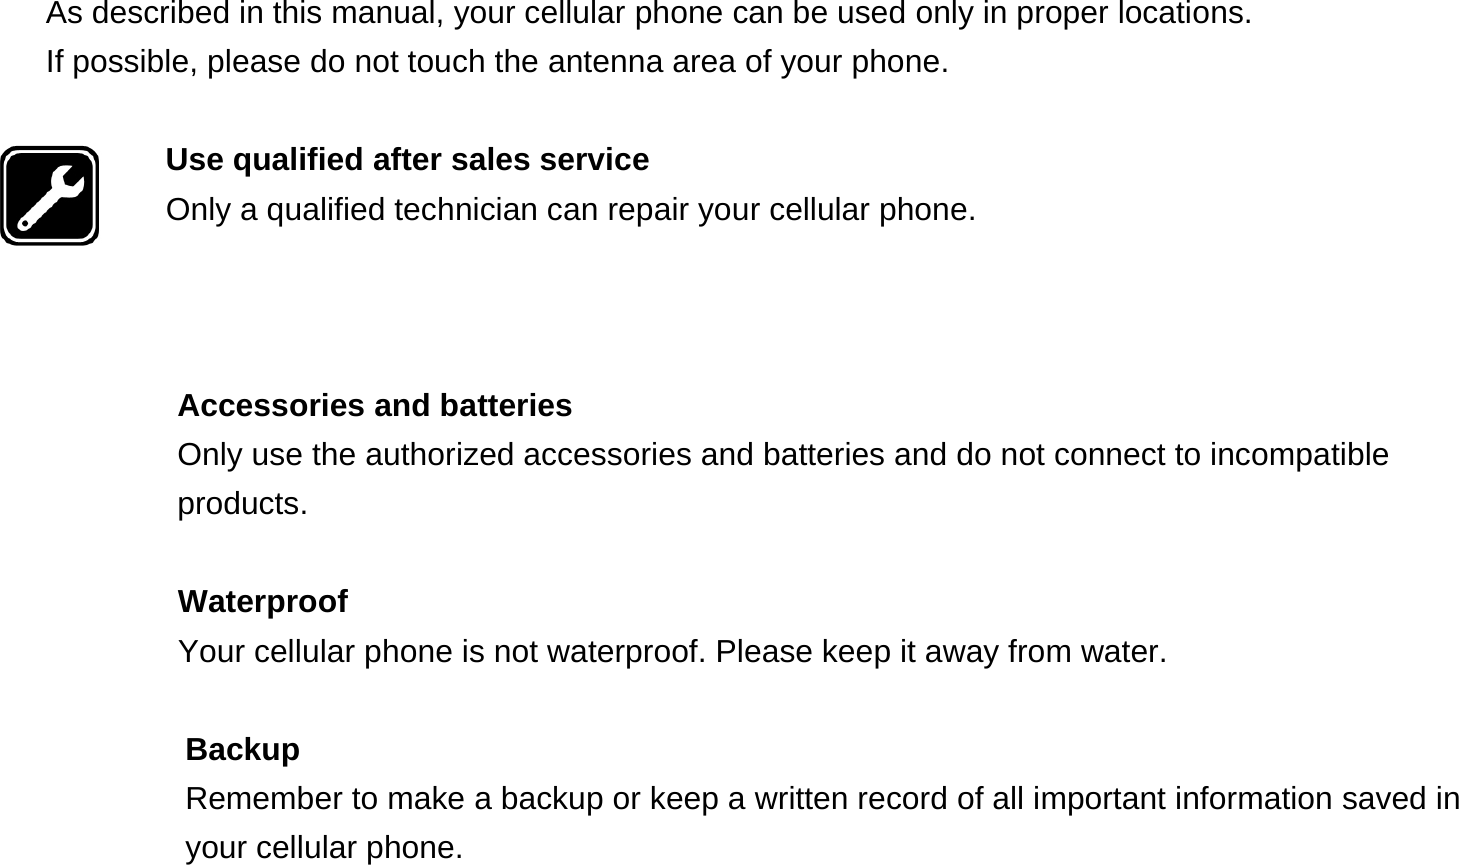  As described in this manual, your cellular phone can be used only in proper locations. If possible, please do not touch the antenna area of your phone.  Use qualified after sales service Only a qualified technician can repair your cellular phone.    Accessories and batteries Only use the authorized accessories and batteries and do not connect to incompatible products.  Waterproof Your cellular phone is not waterproof. Please keep it away from water.  Backup Remember to make a backup or keep a written record of all important information saved in your cellular phone.  